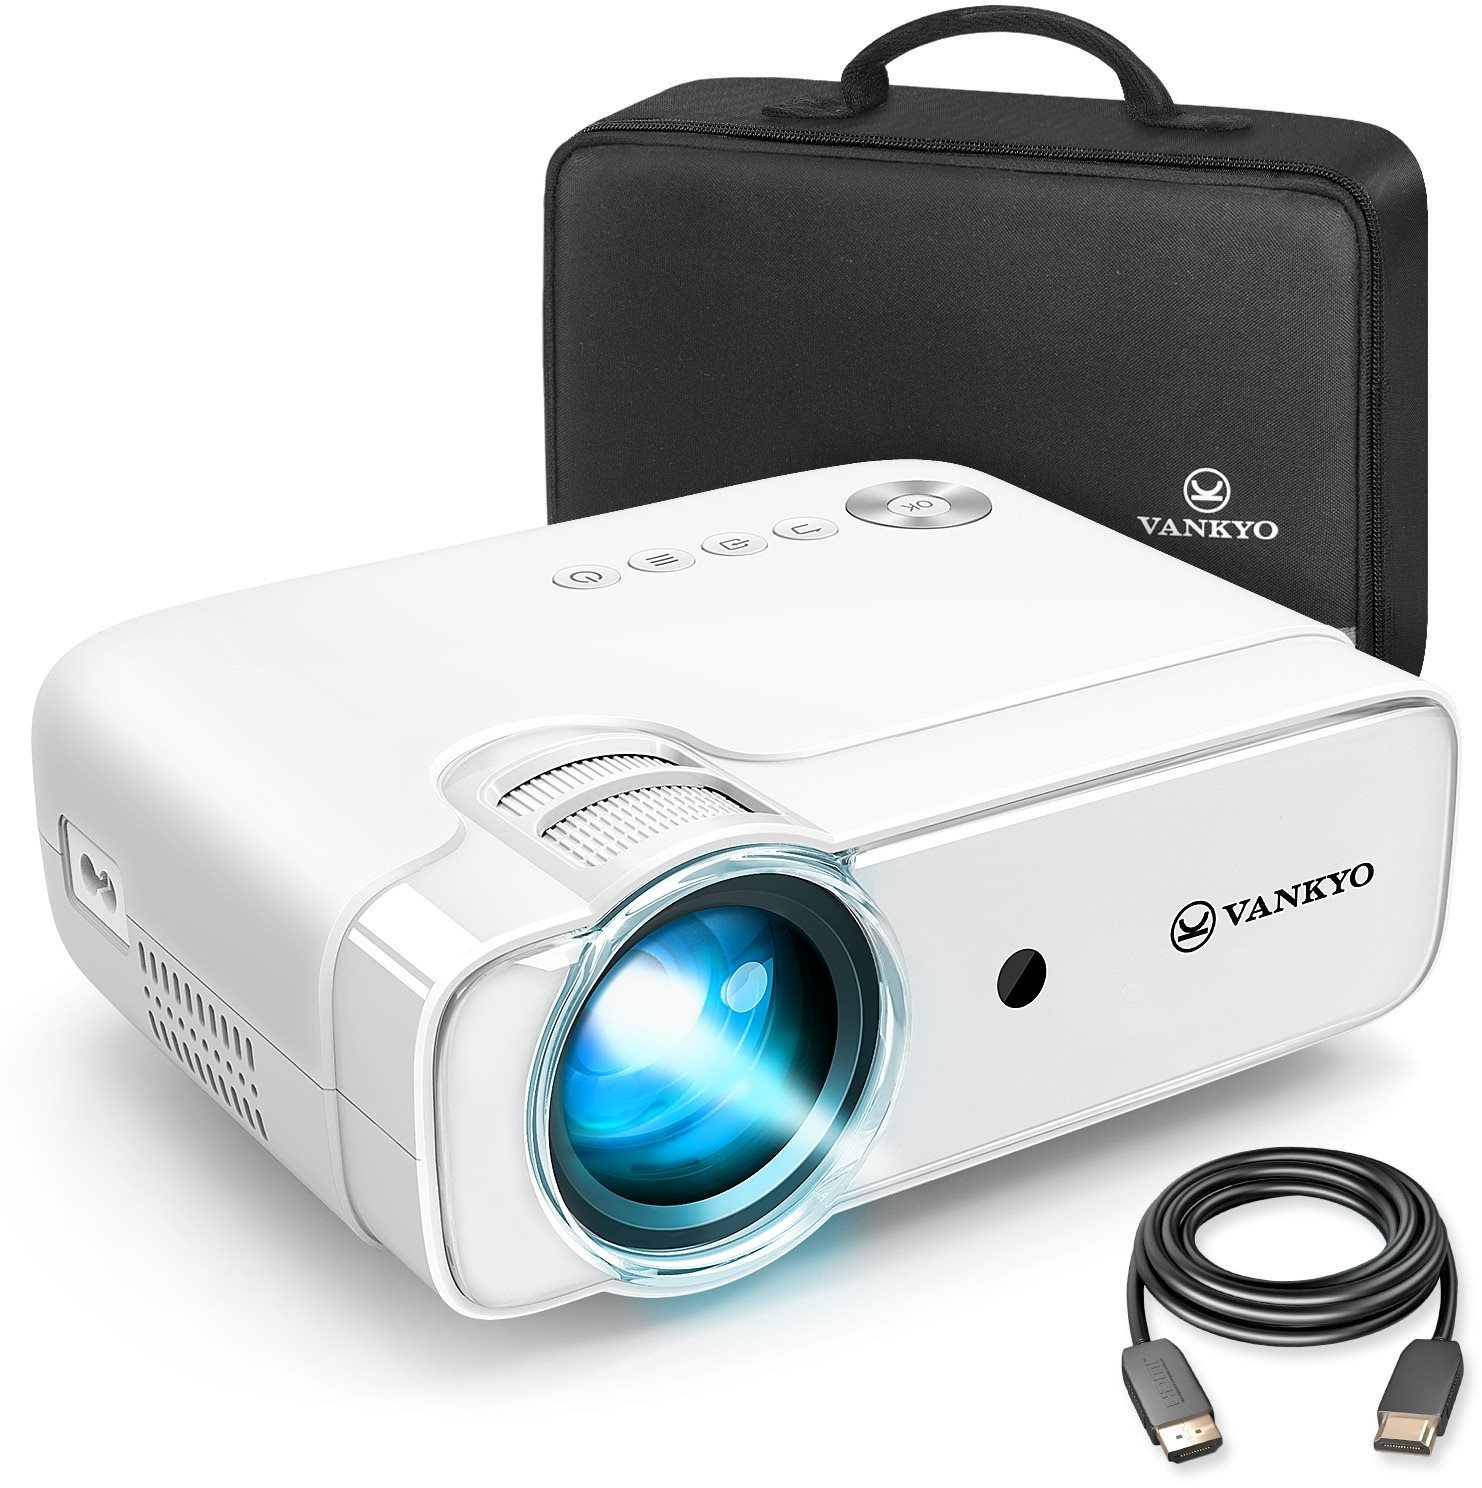 Projector VANKYO LEISURE 430 Lateral view